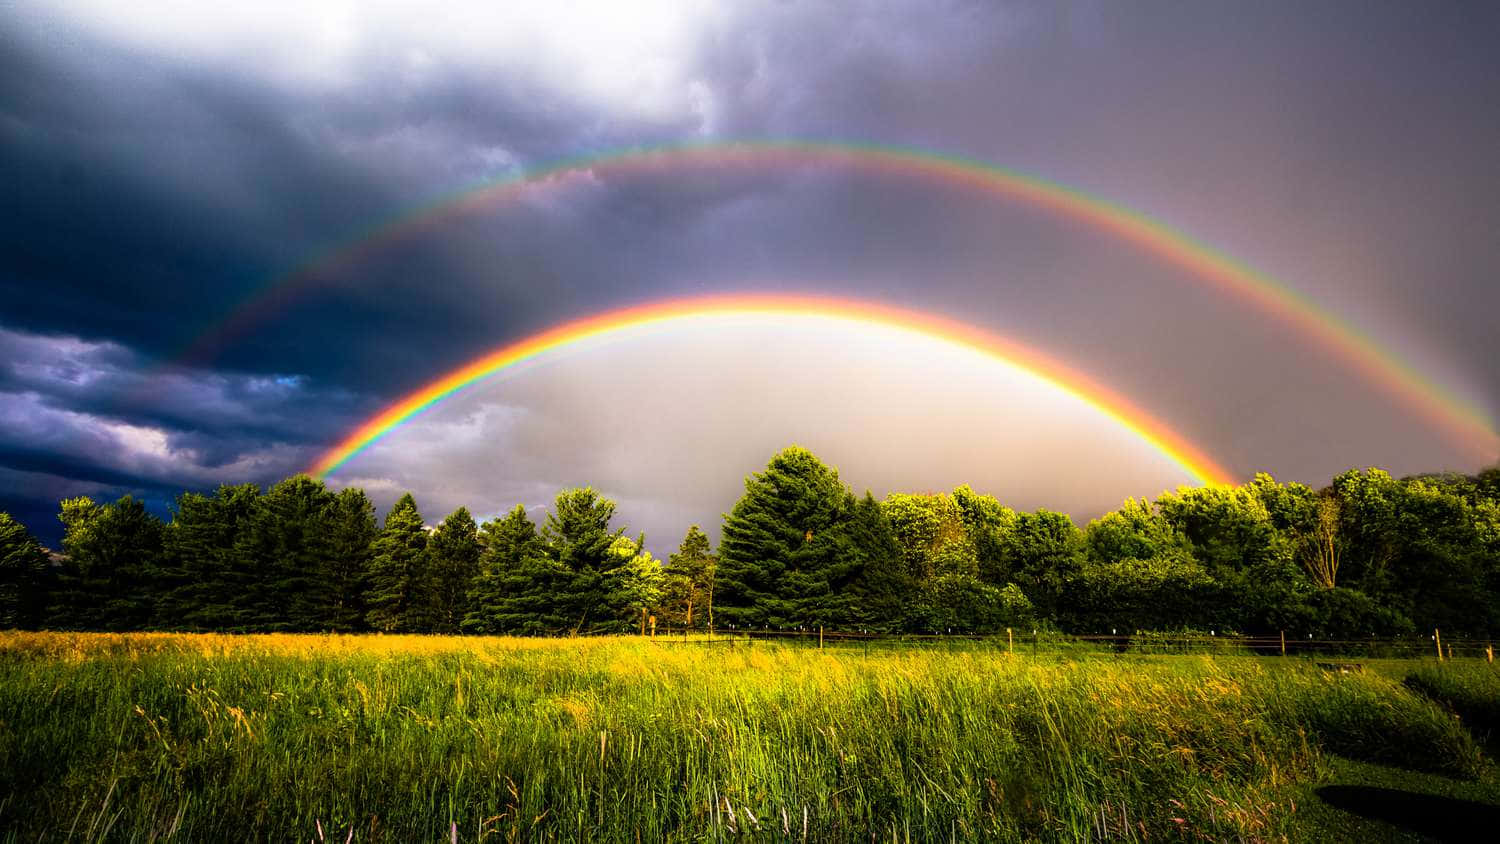 Capturing the Expansive Beauty of a Rainbow